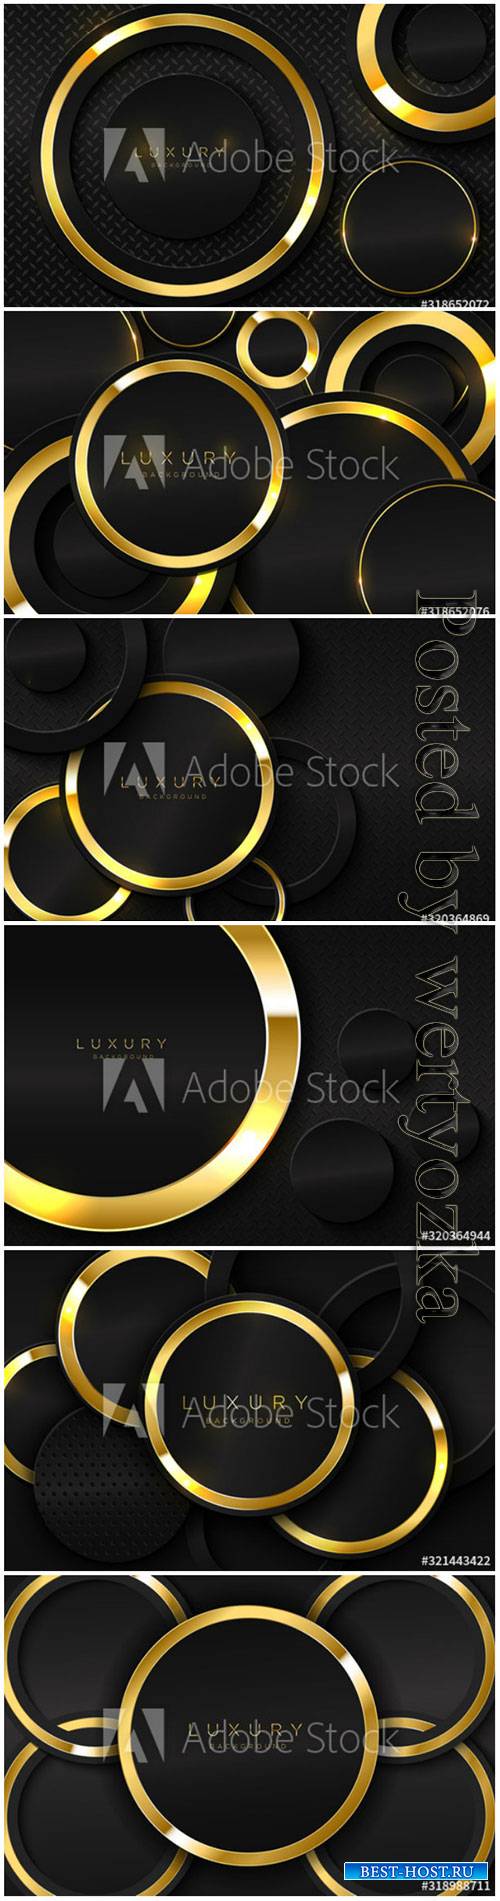 Realistic background with shiny gold ring shape